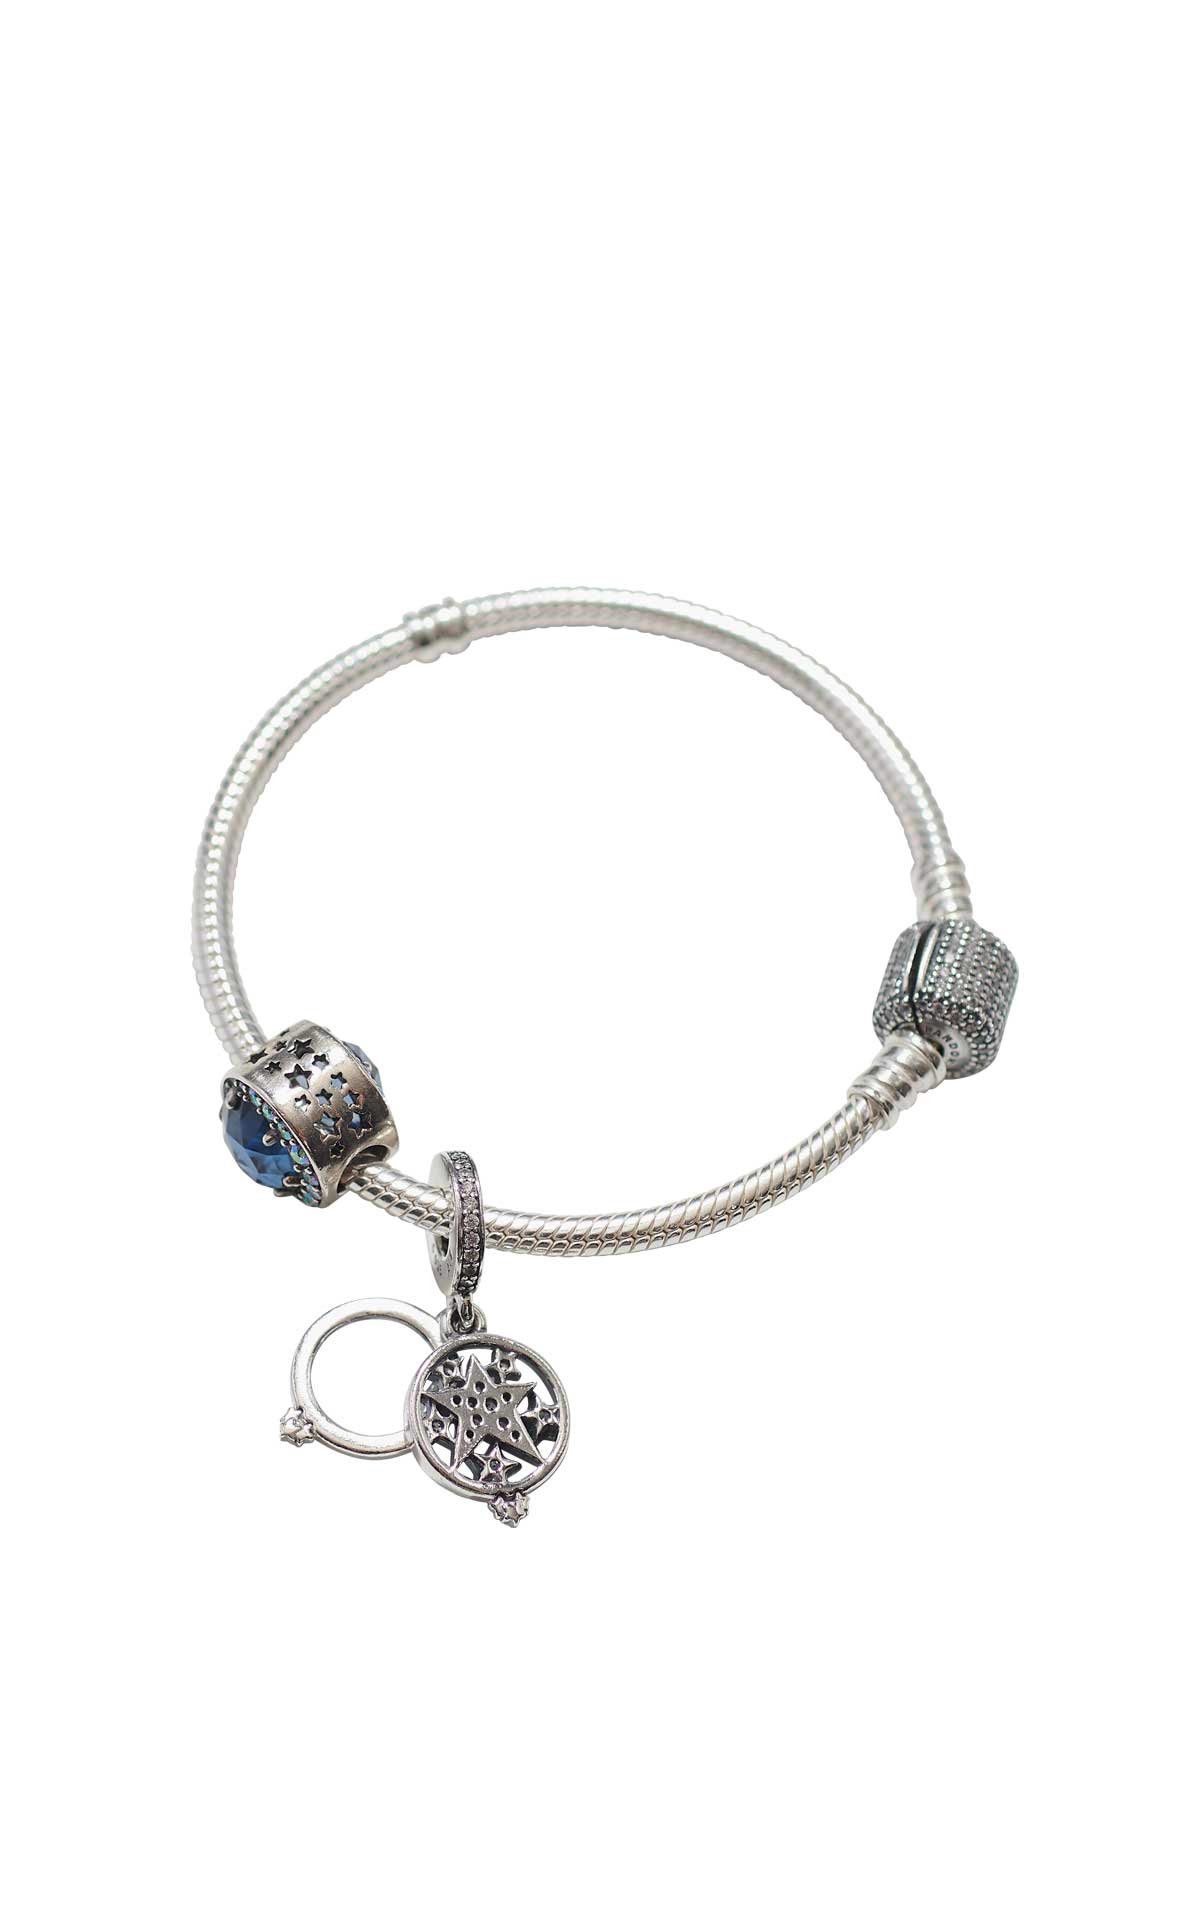 Bracelet with two blue star charms and silver pendant Pandora